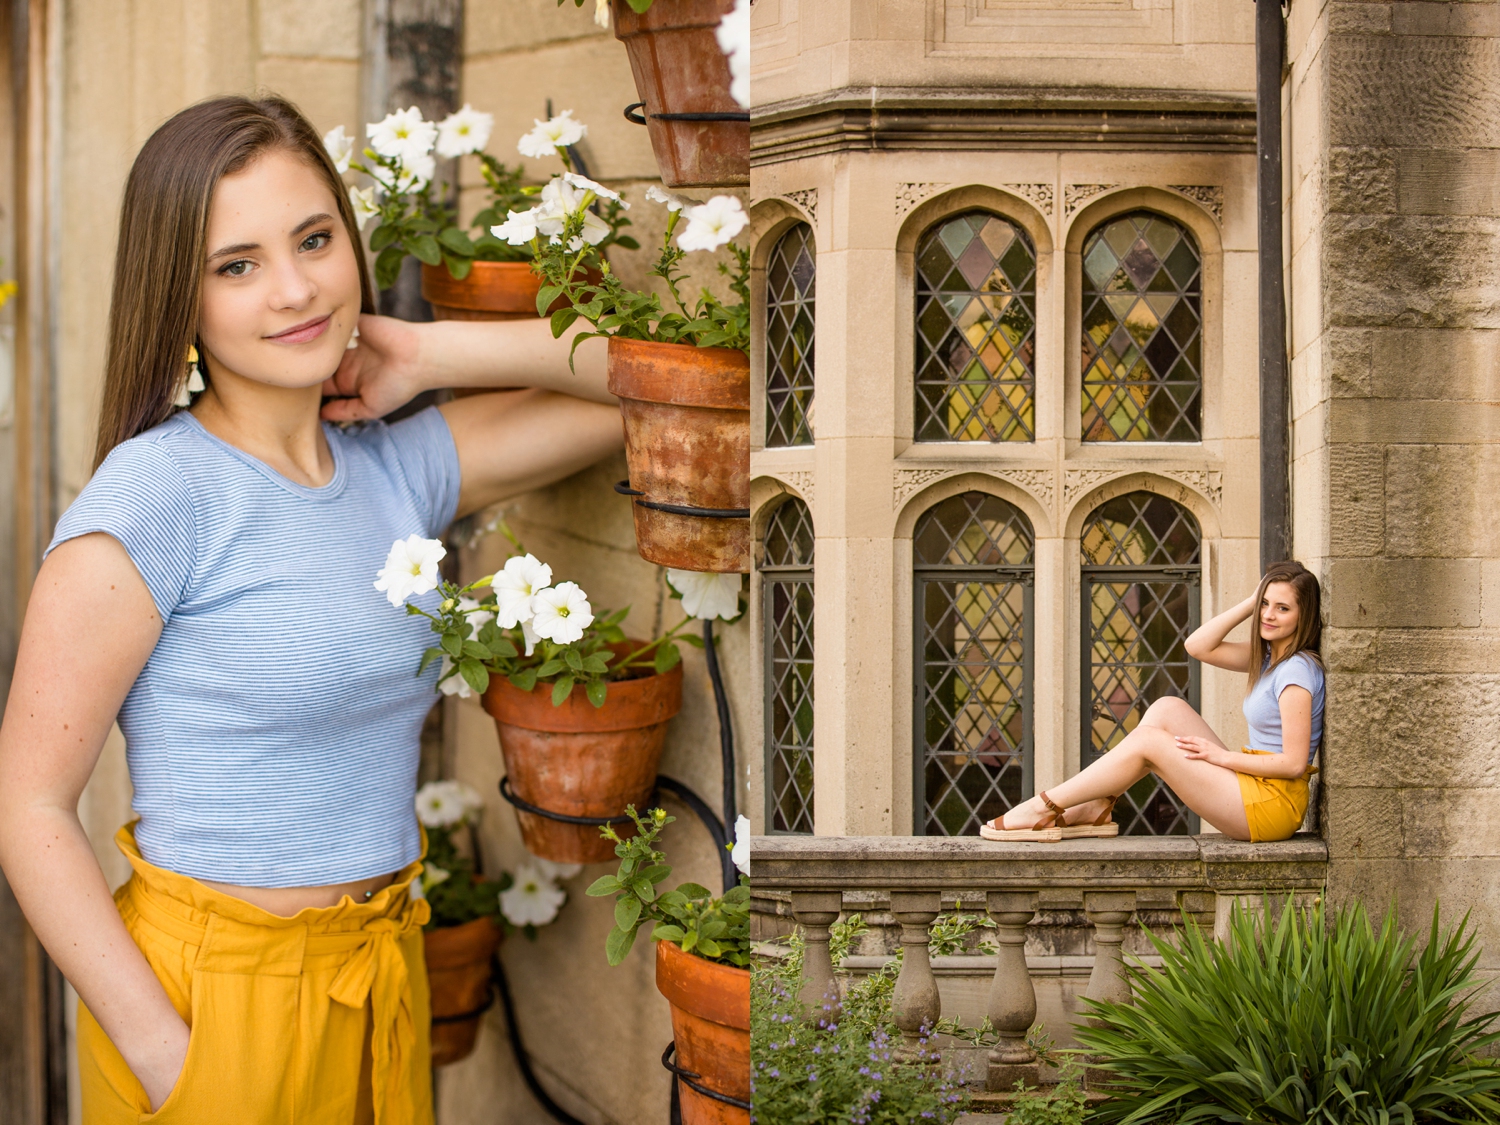 pittsburgh senior photos, pittsburgh senior photographer, location for photoshoot pittsburgh, hartwood acres mansion senior photos